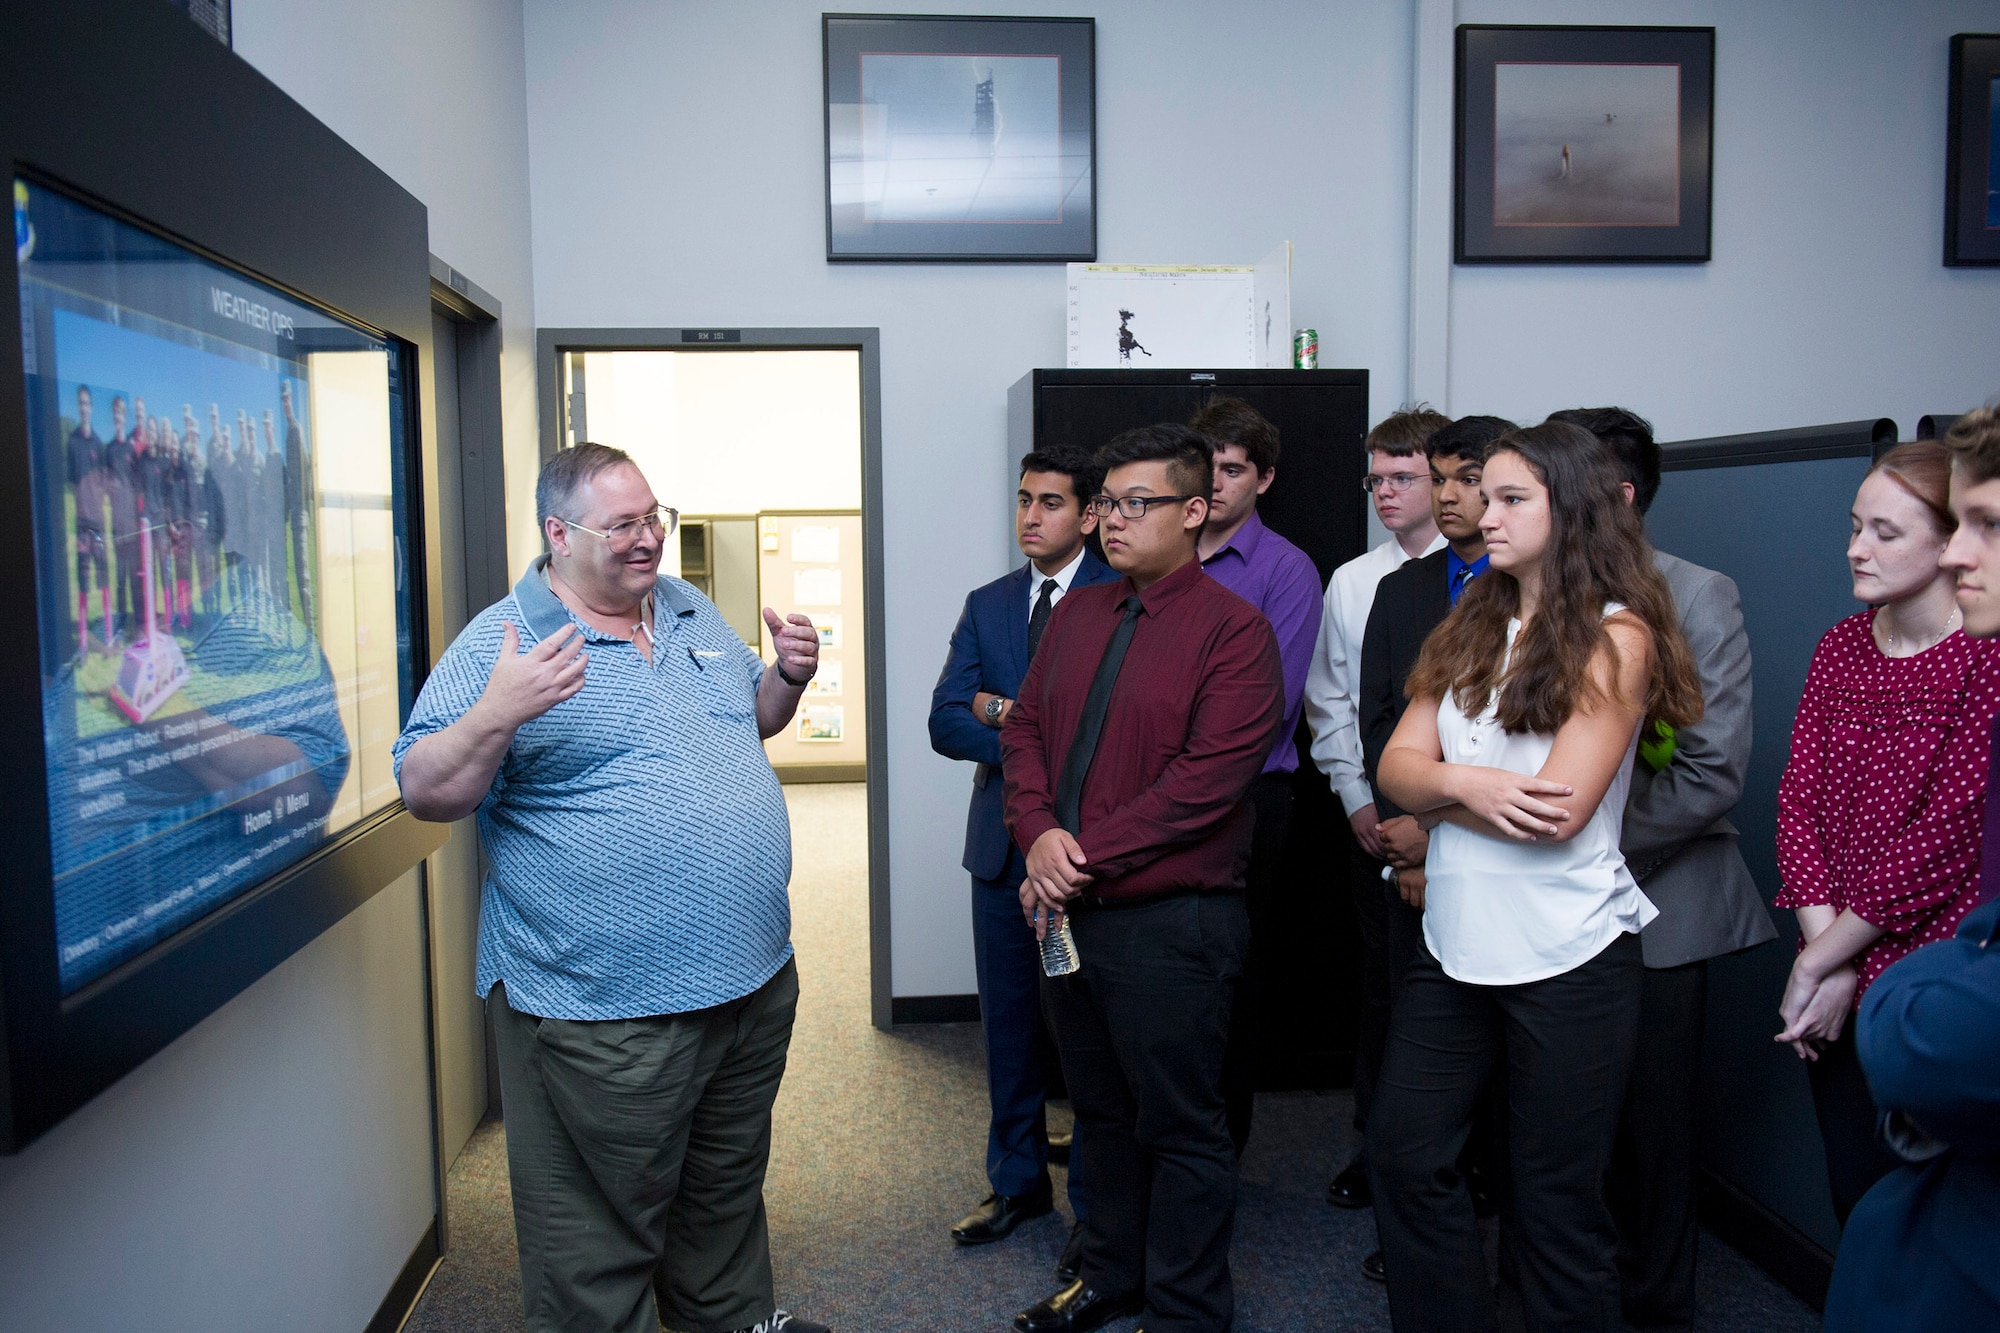 William Roeder, 45th Weather Squadron meteorologist, gives Lake Nona High School students a tour of the Morrell Operations Center April 18, 2017, at Cape Canaveral Air Force Station, Fla. Members of the 45th WS met with students to discuss their Lightning Launch Commit Criteria findings and results in regards to weather and climatology. Prior to the school year, Roeder reached out to the high school and introduced them to the project. The project provides students with real-world experience by following a business model of preparation, set-up, and using innovative methods to complete it. (U.S. Air Force photo by Phil Sunkel)  